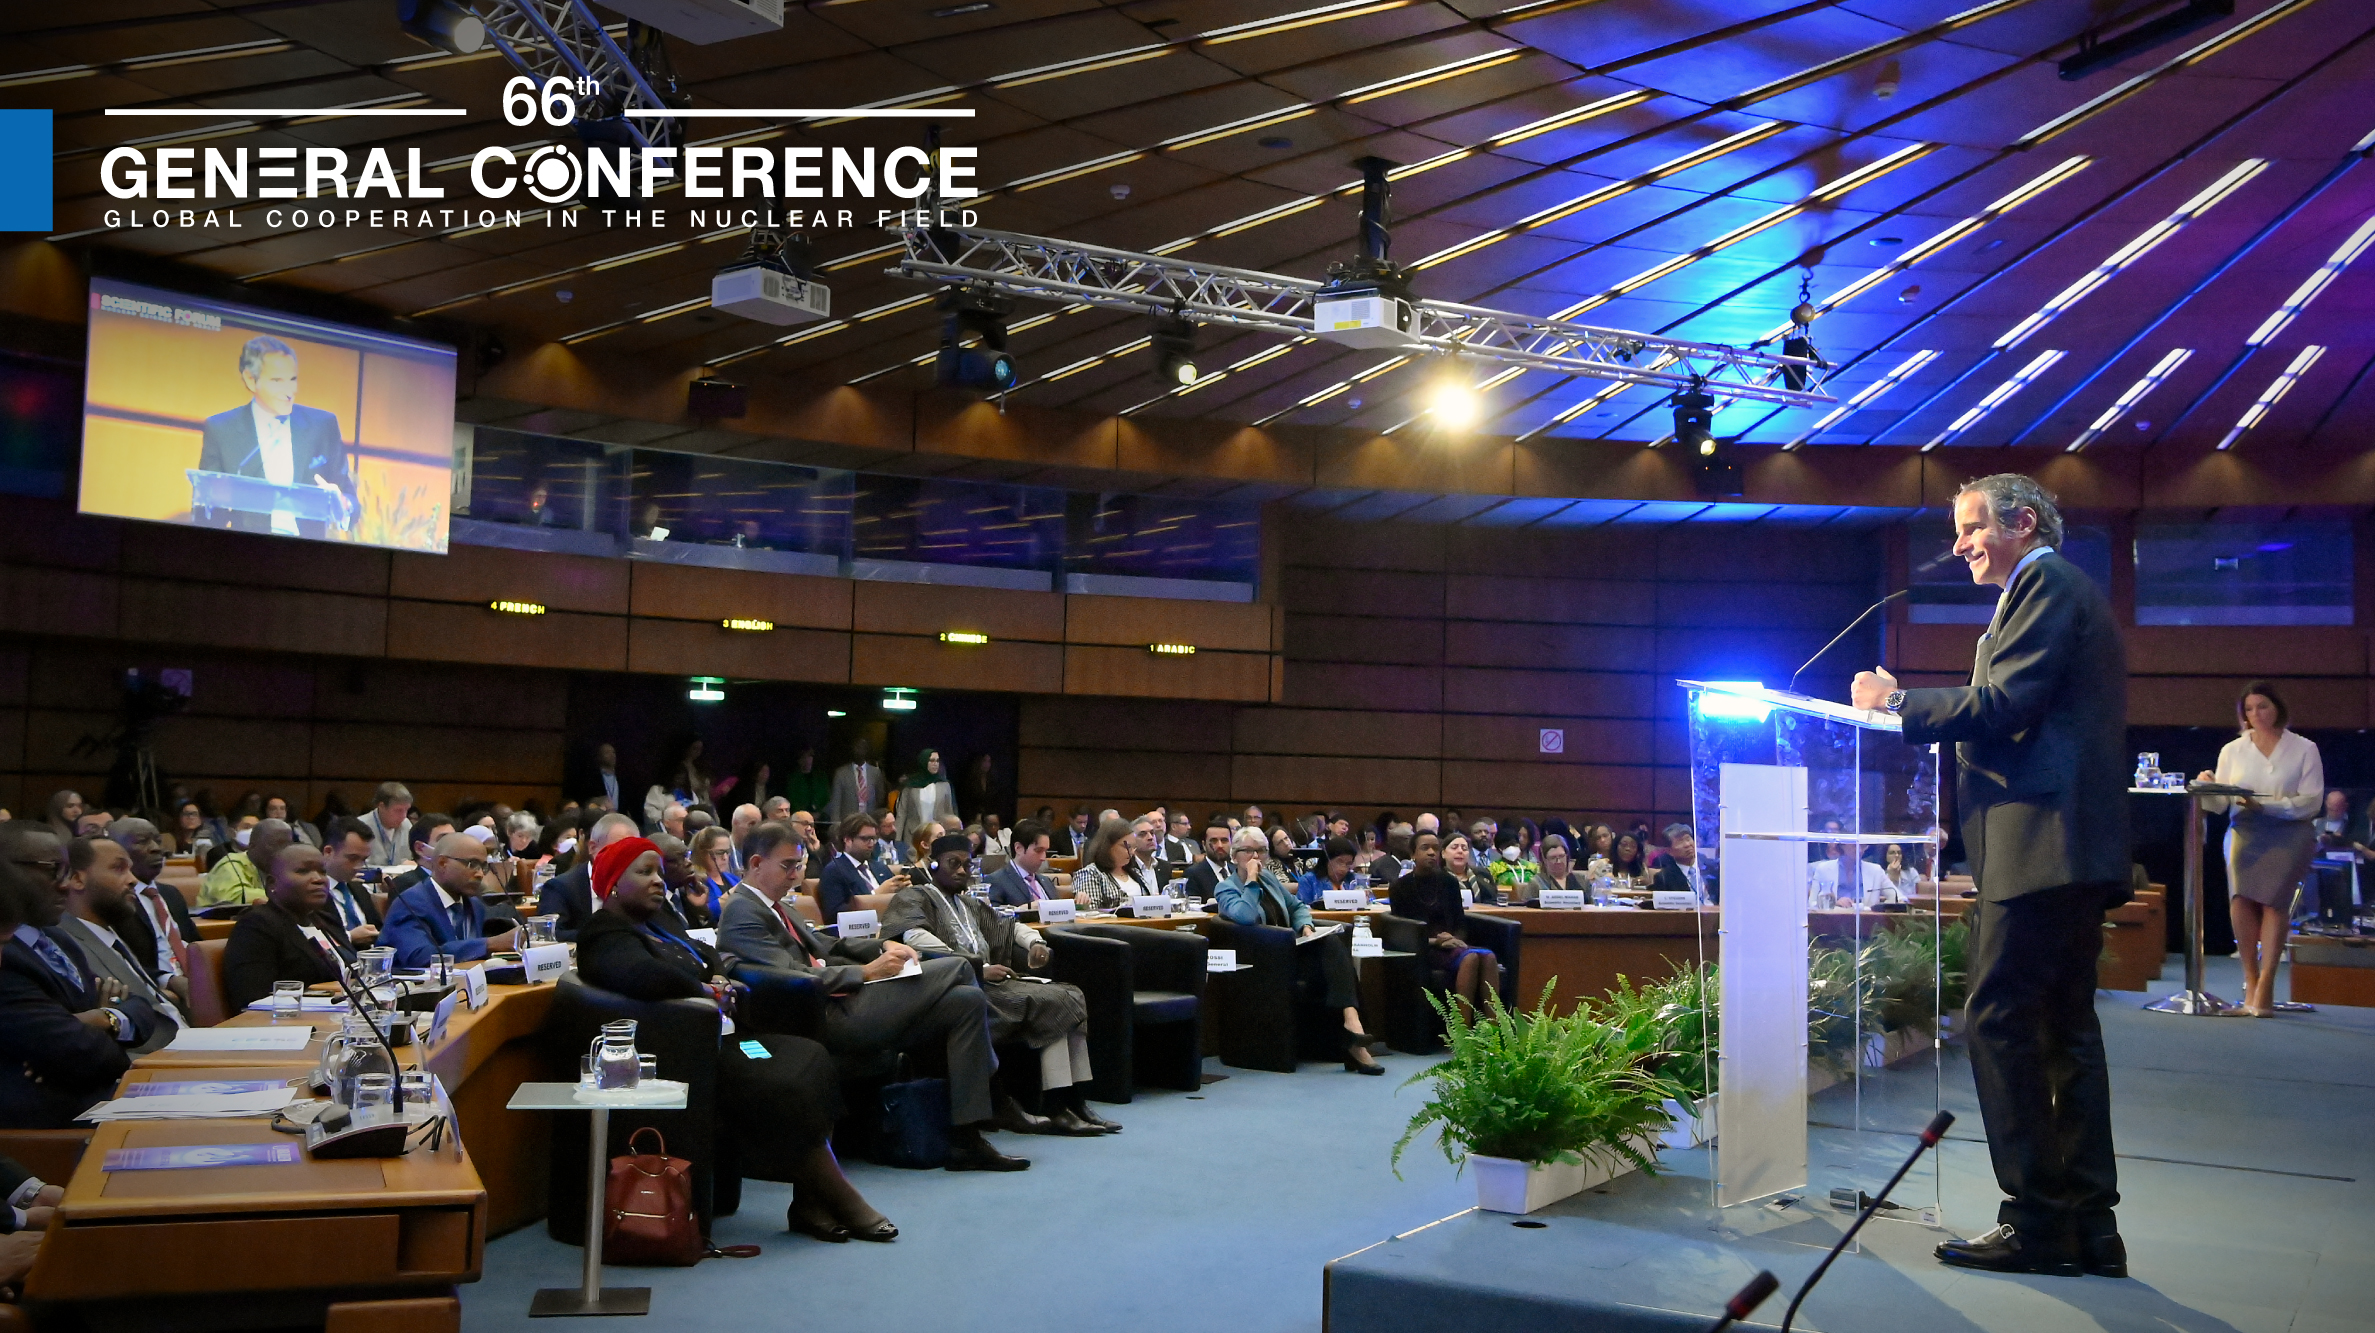 General Conference: Day 2 Highlights | IAEA - International Atomic Energy Agency